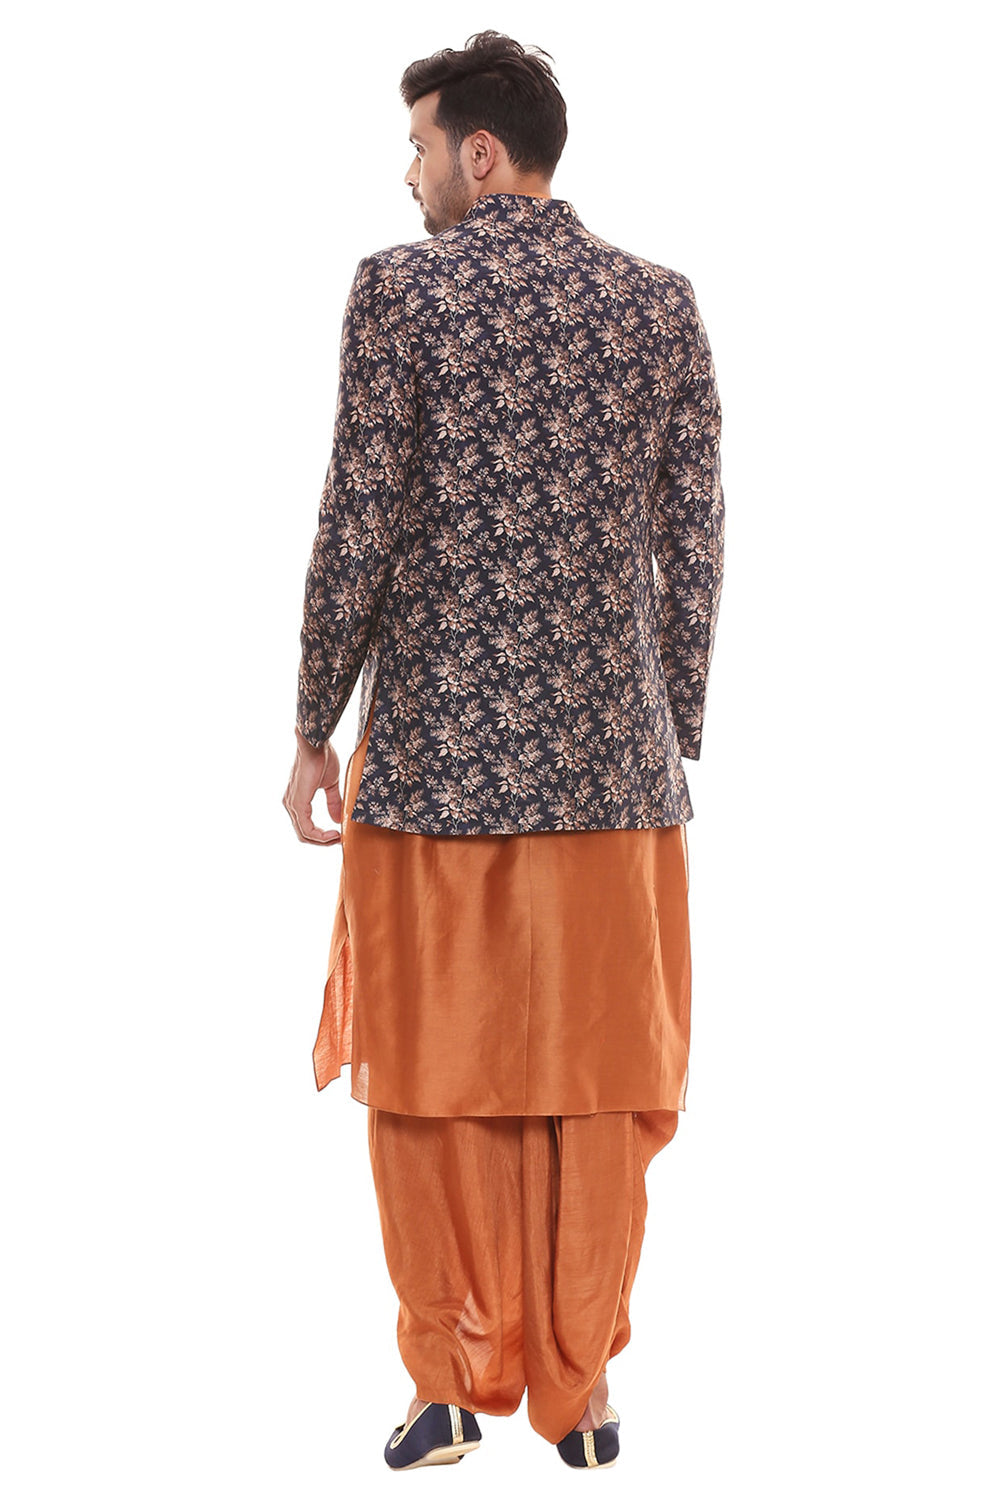 Rust Orange Collared Kurta With Dhoti Pants Paired With Applique Floral Jacket